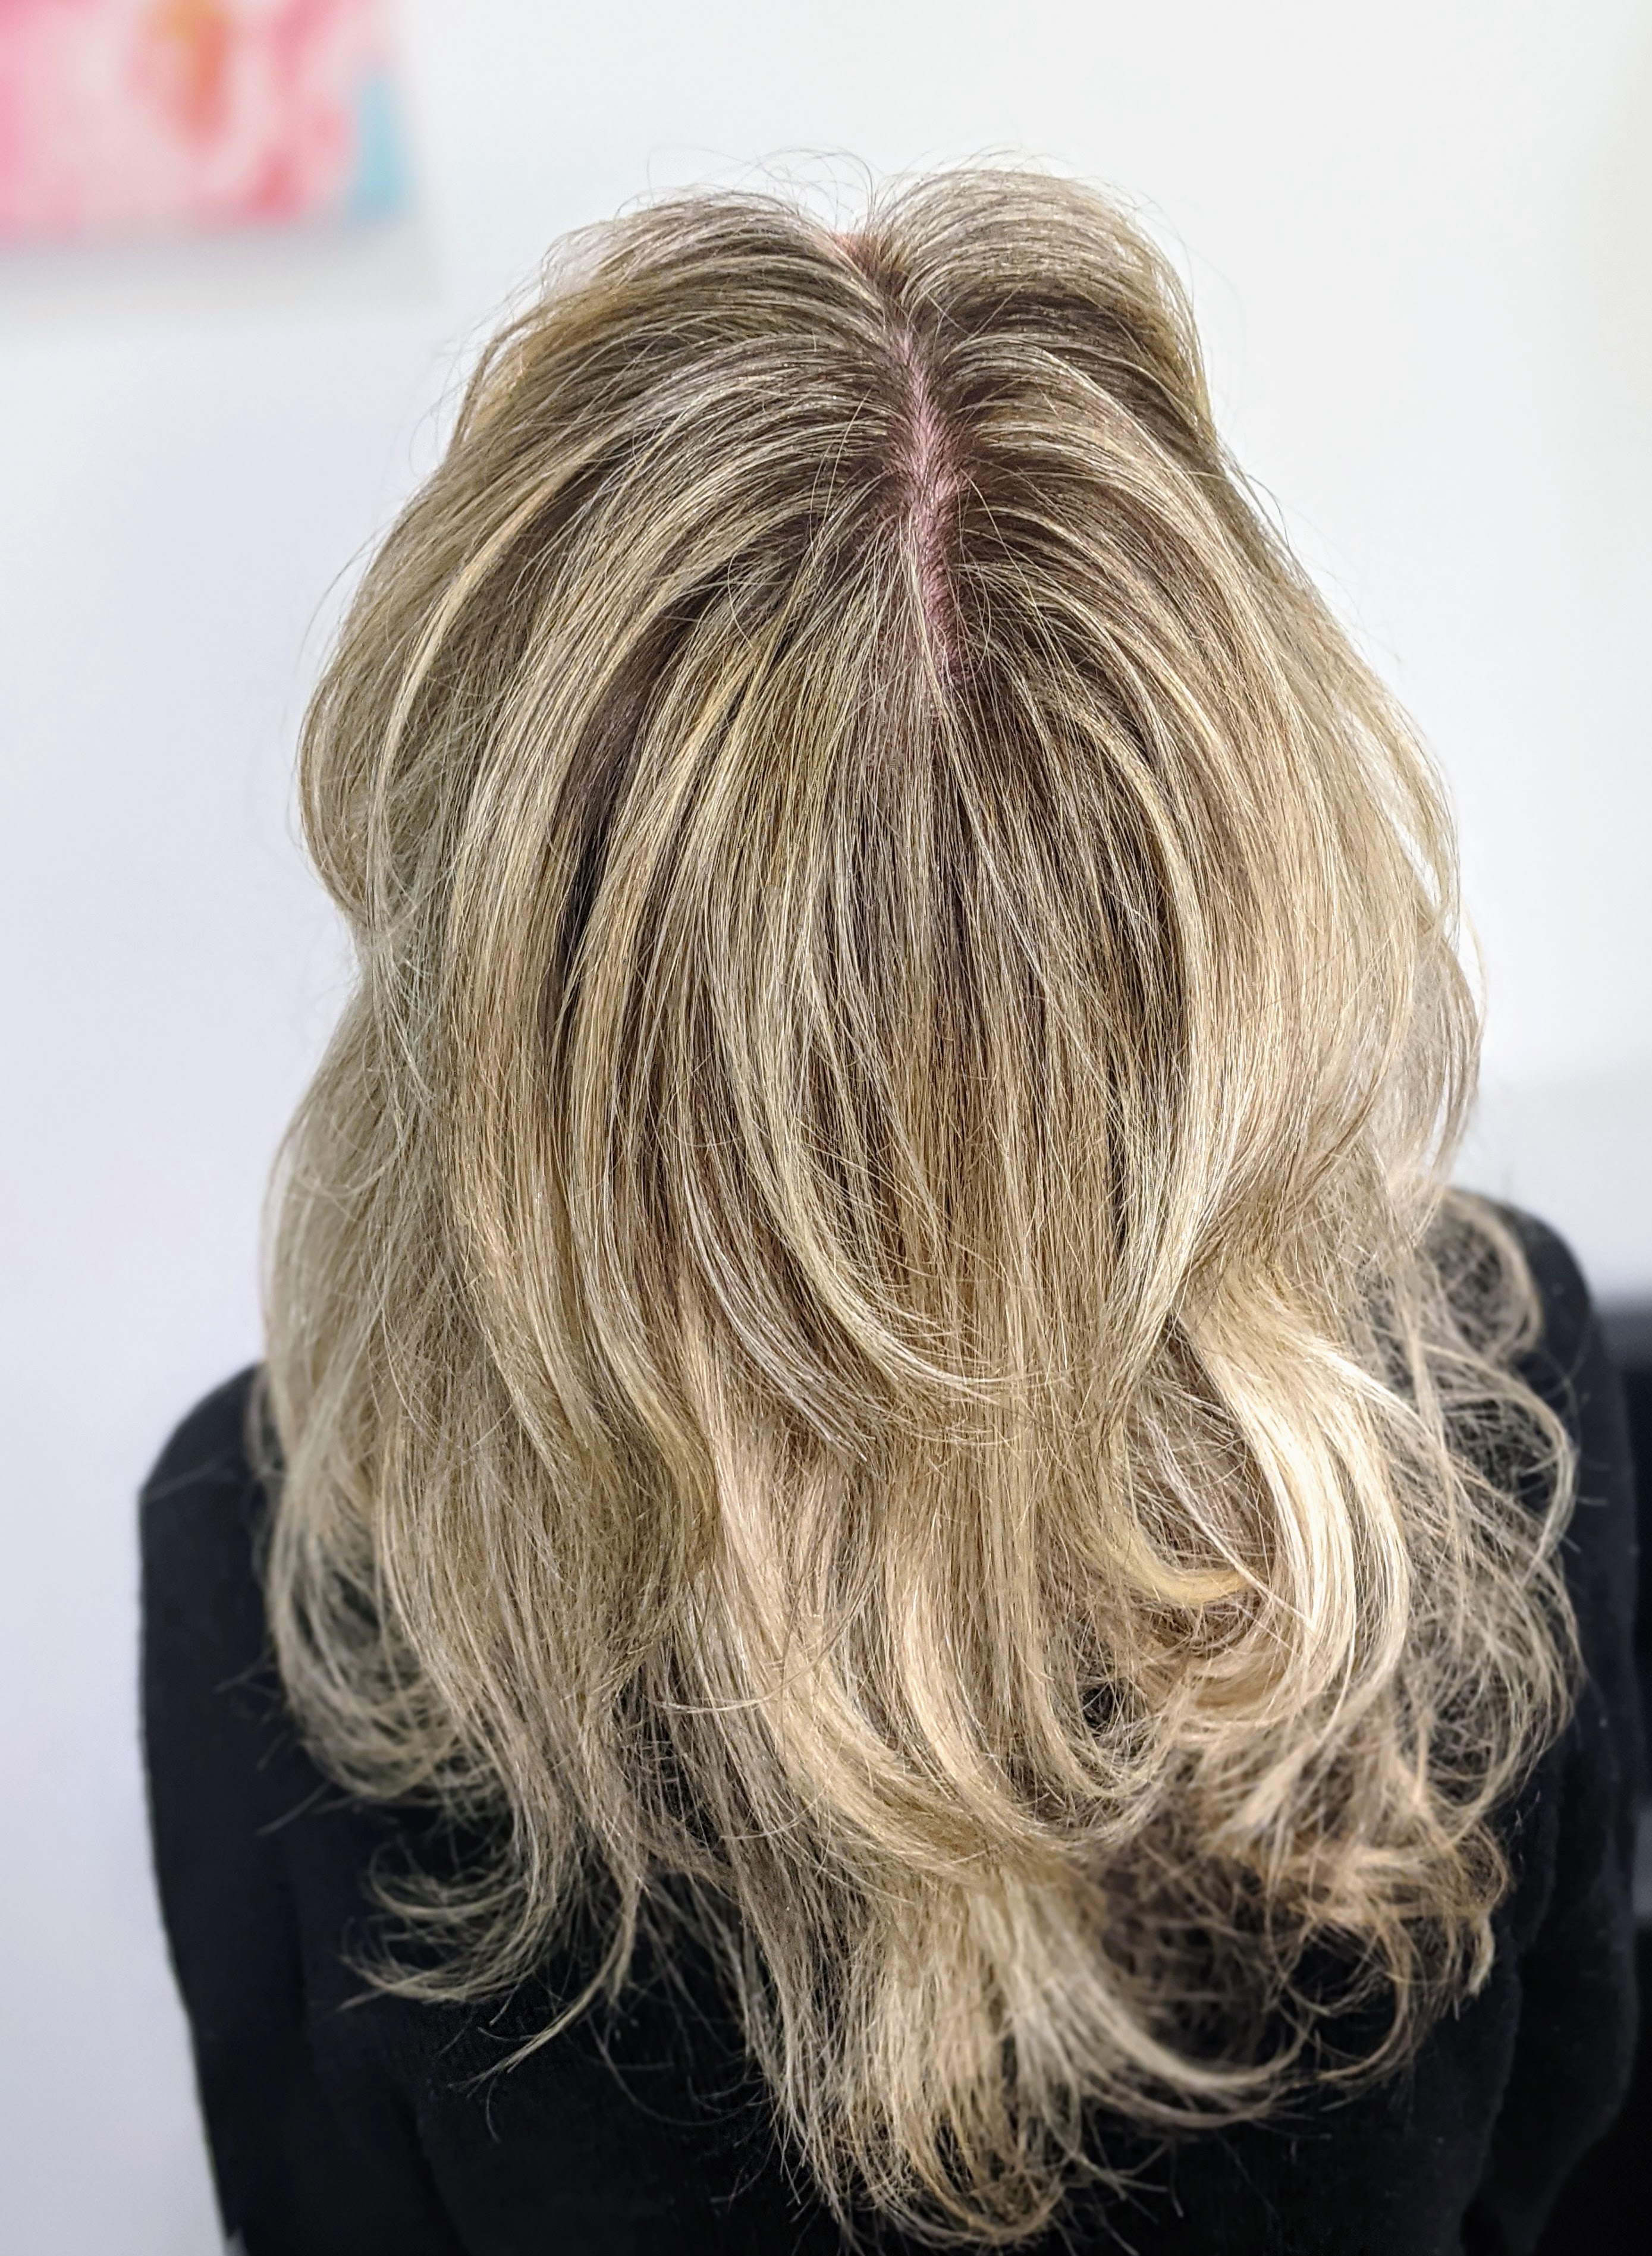 What Is The Difference Between Highlights And Balayage? | Vinaccia Hair